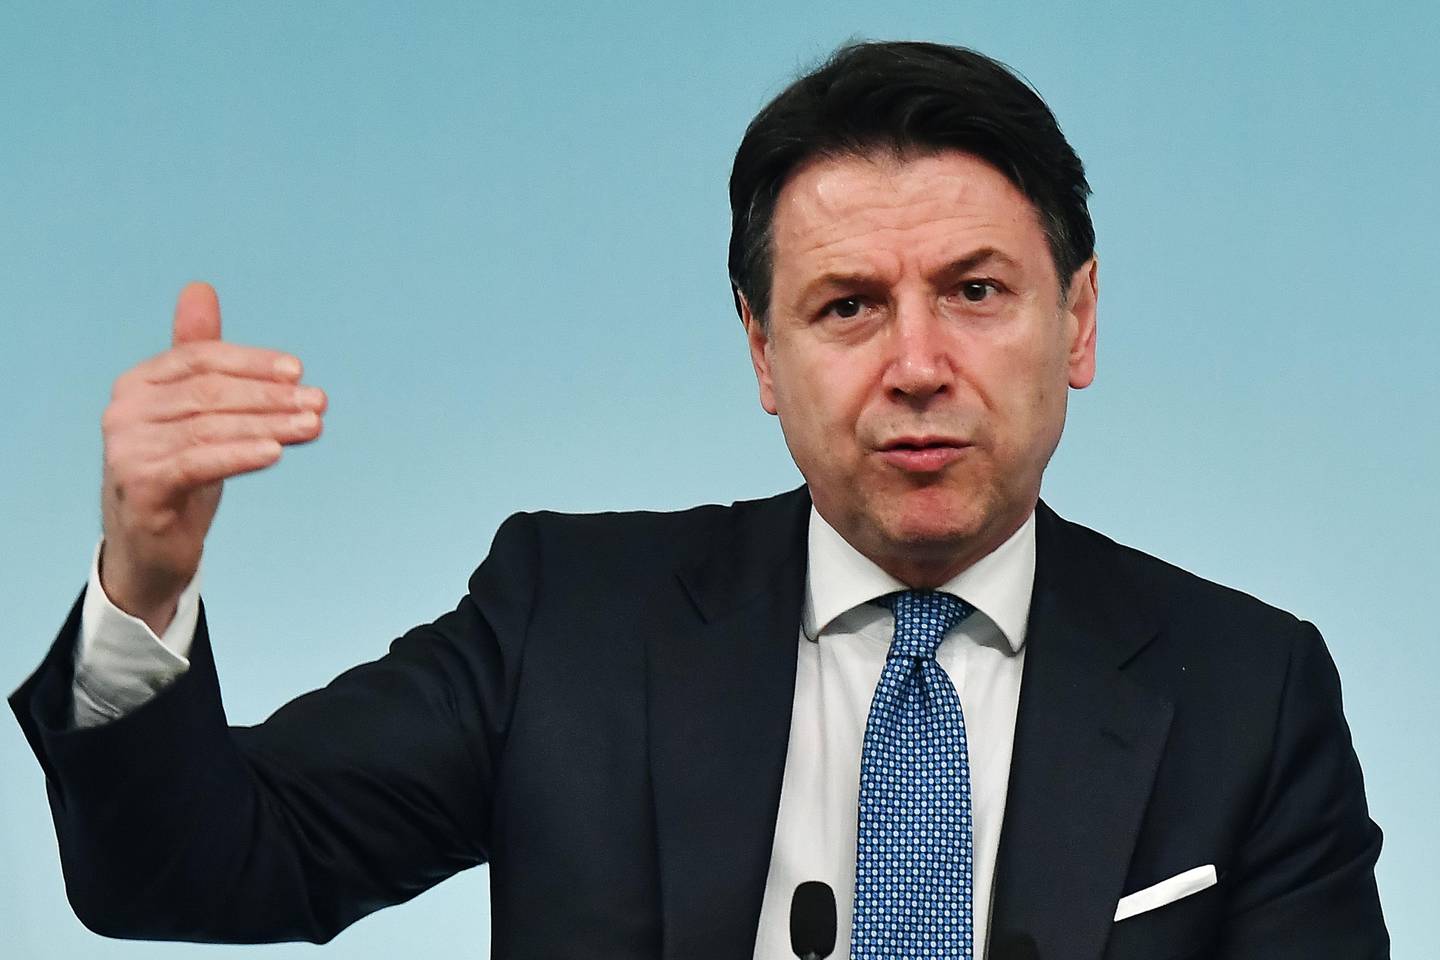 In this photo taken on March 04, 2020 Italy's Prime Minister Giuseppe Conte speaks during a press conference held at Rome's Chigi Palace, following a Ministers' cabinet meeting dedicated to the corinavirus crisis. - Lockdown measures taken in Italy over the coronavirus pandemic will be extended beyond their original deadlines, Prime Minister Giuseppe Conte said on March 19, 2020. (Photo by Tiziana FABI / AFP)